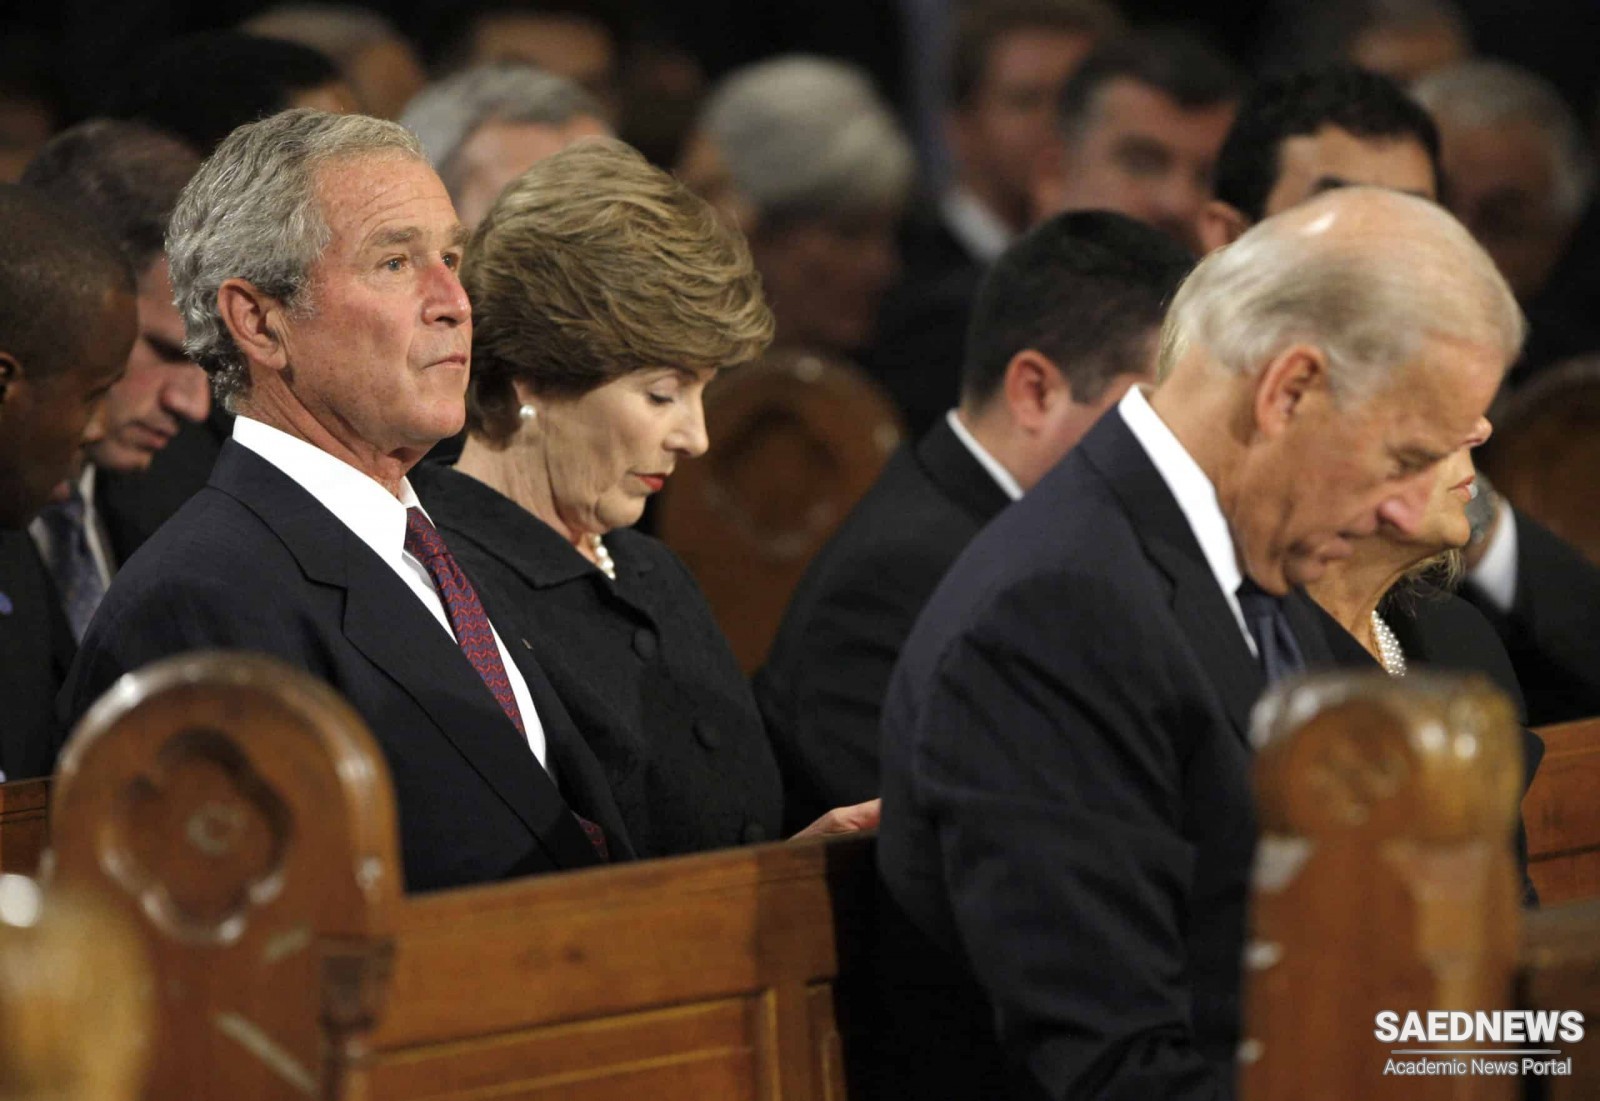 George W. Bush Embarrassed by an Untimely Mistake